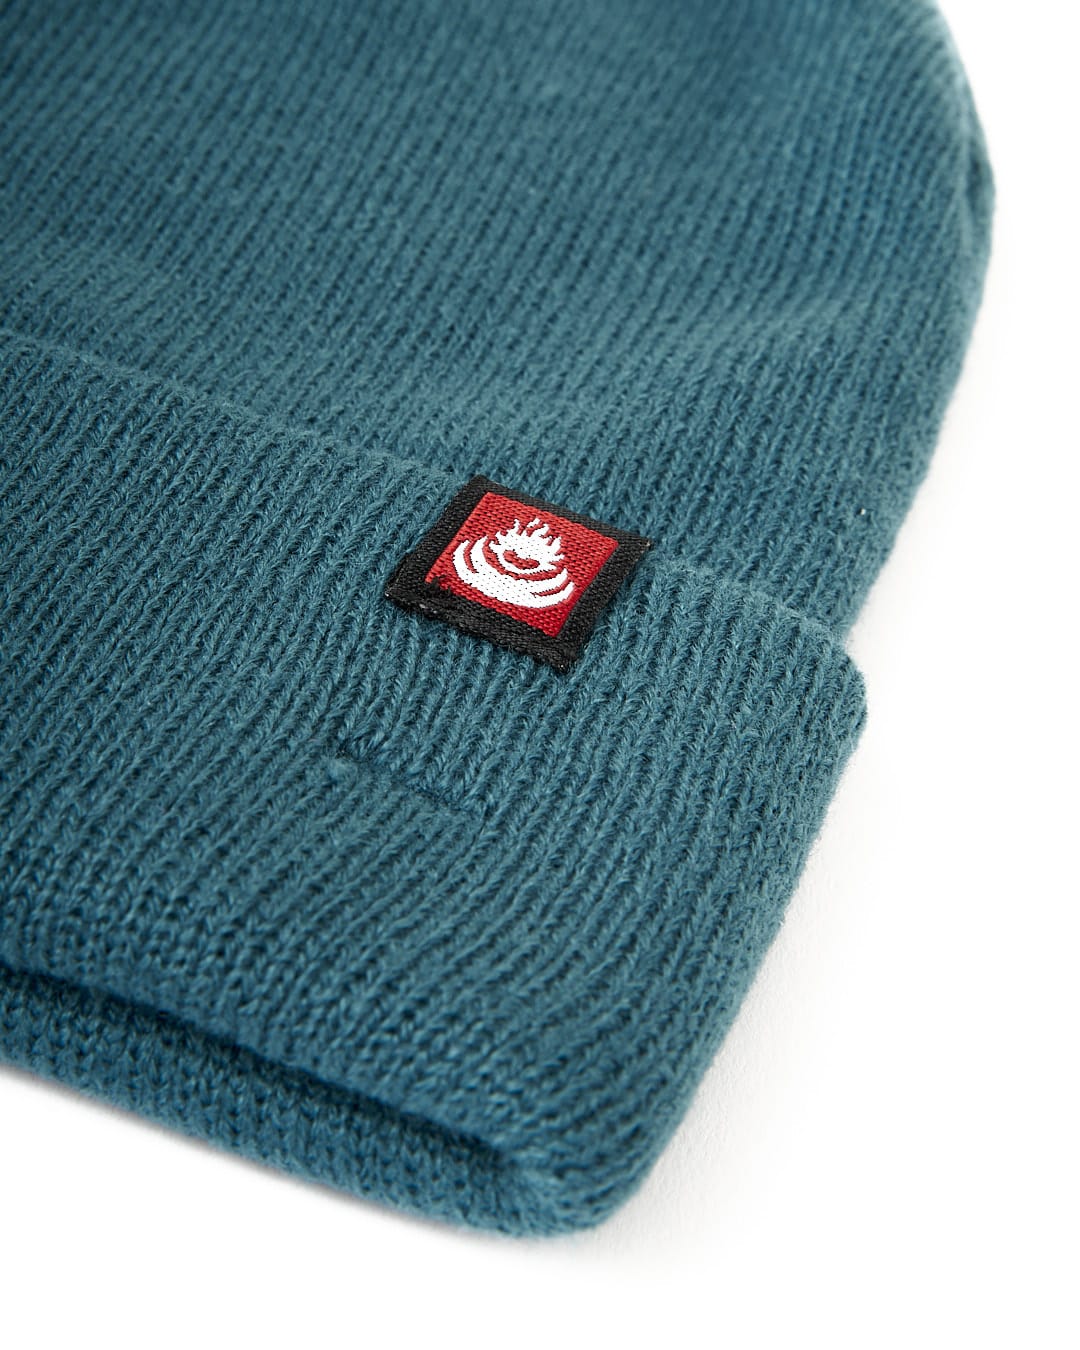 A Saltrock Ok - Tight Knit Beanie - Blue with a red patch on it.